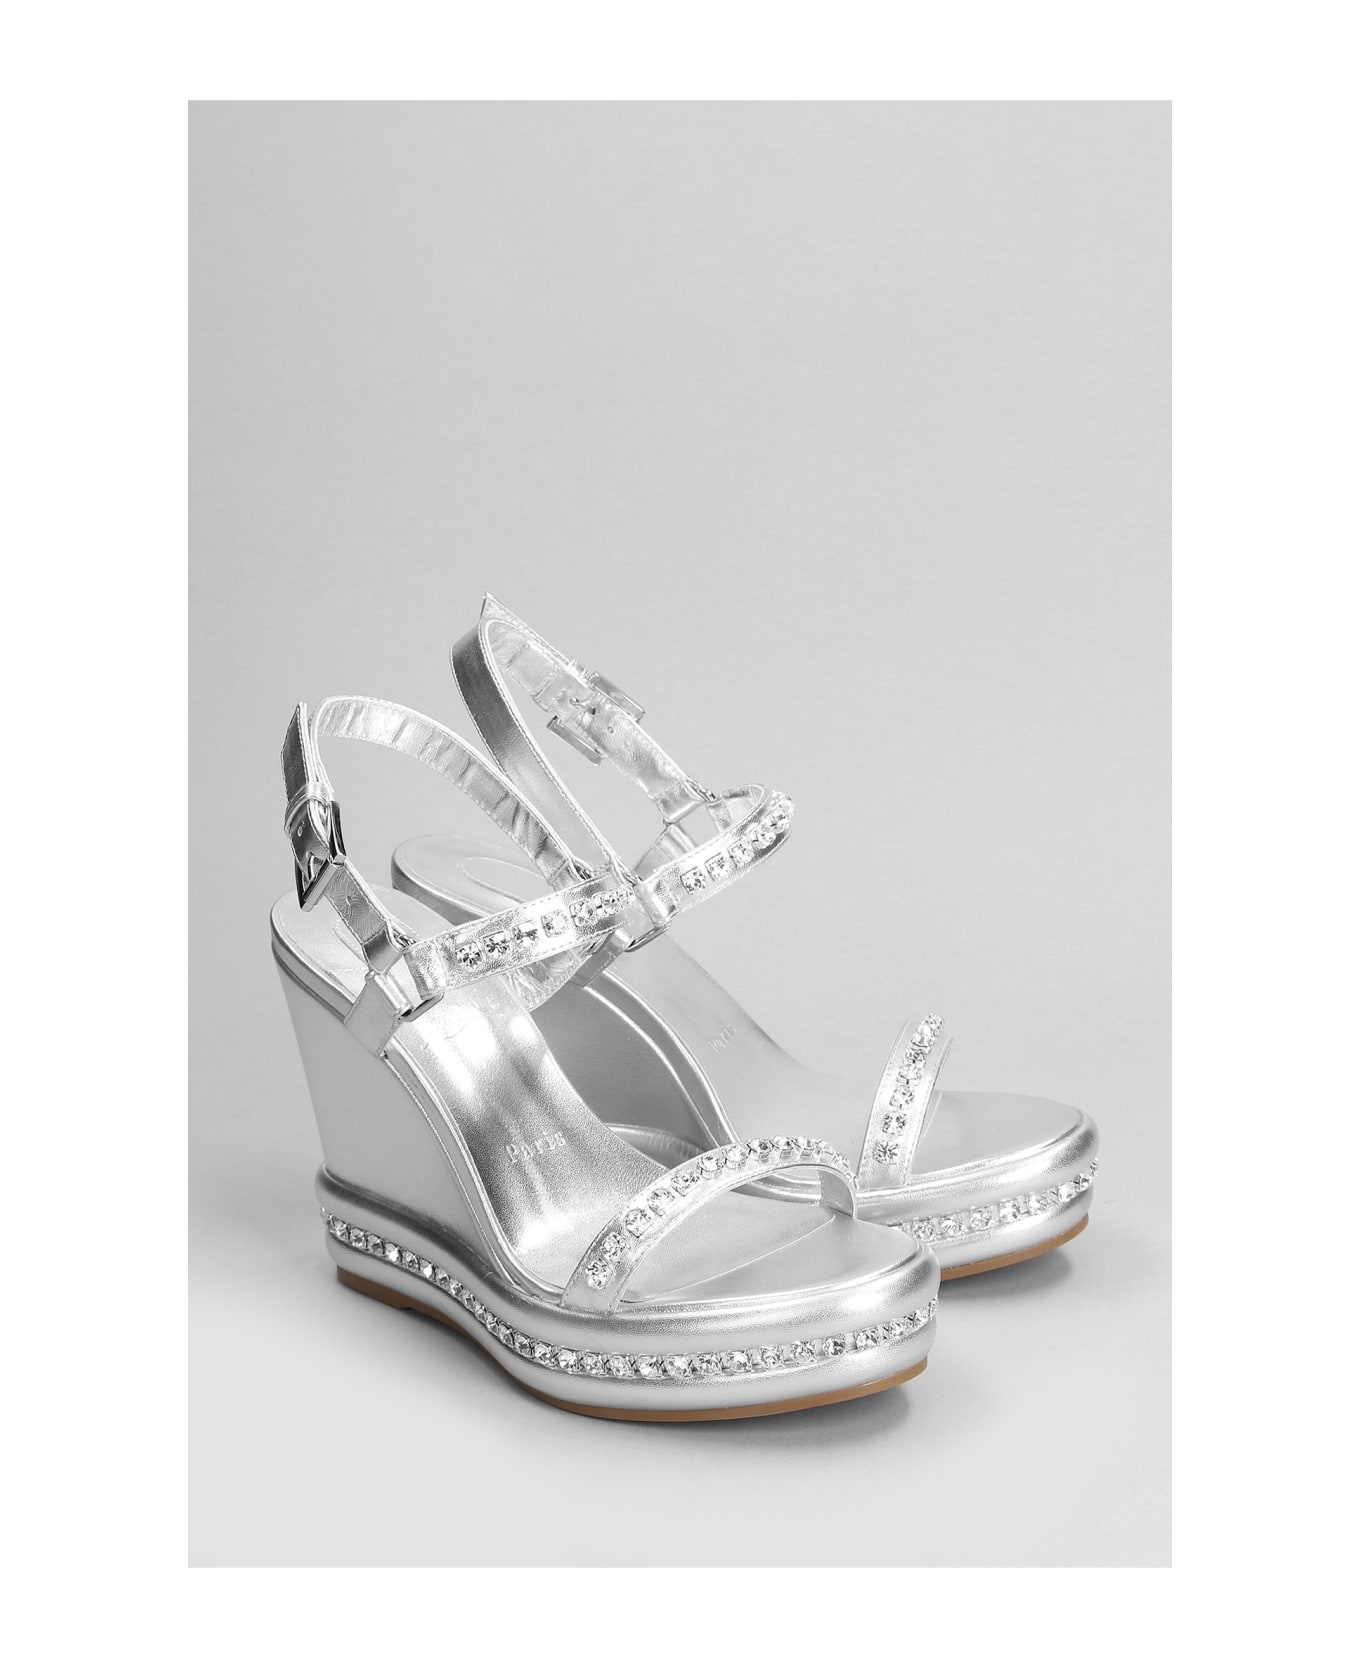 Christian Louboutin Pyrastrass 110 Wedges In Silver Leather - silver サンダル